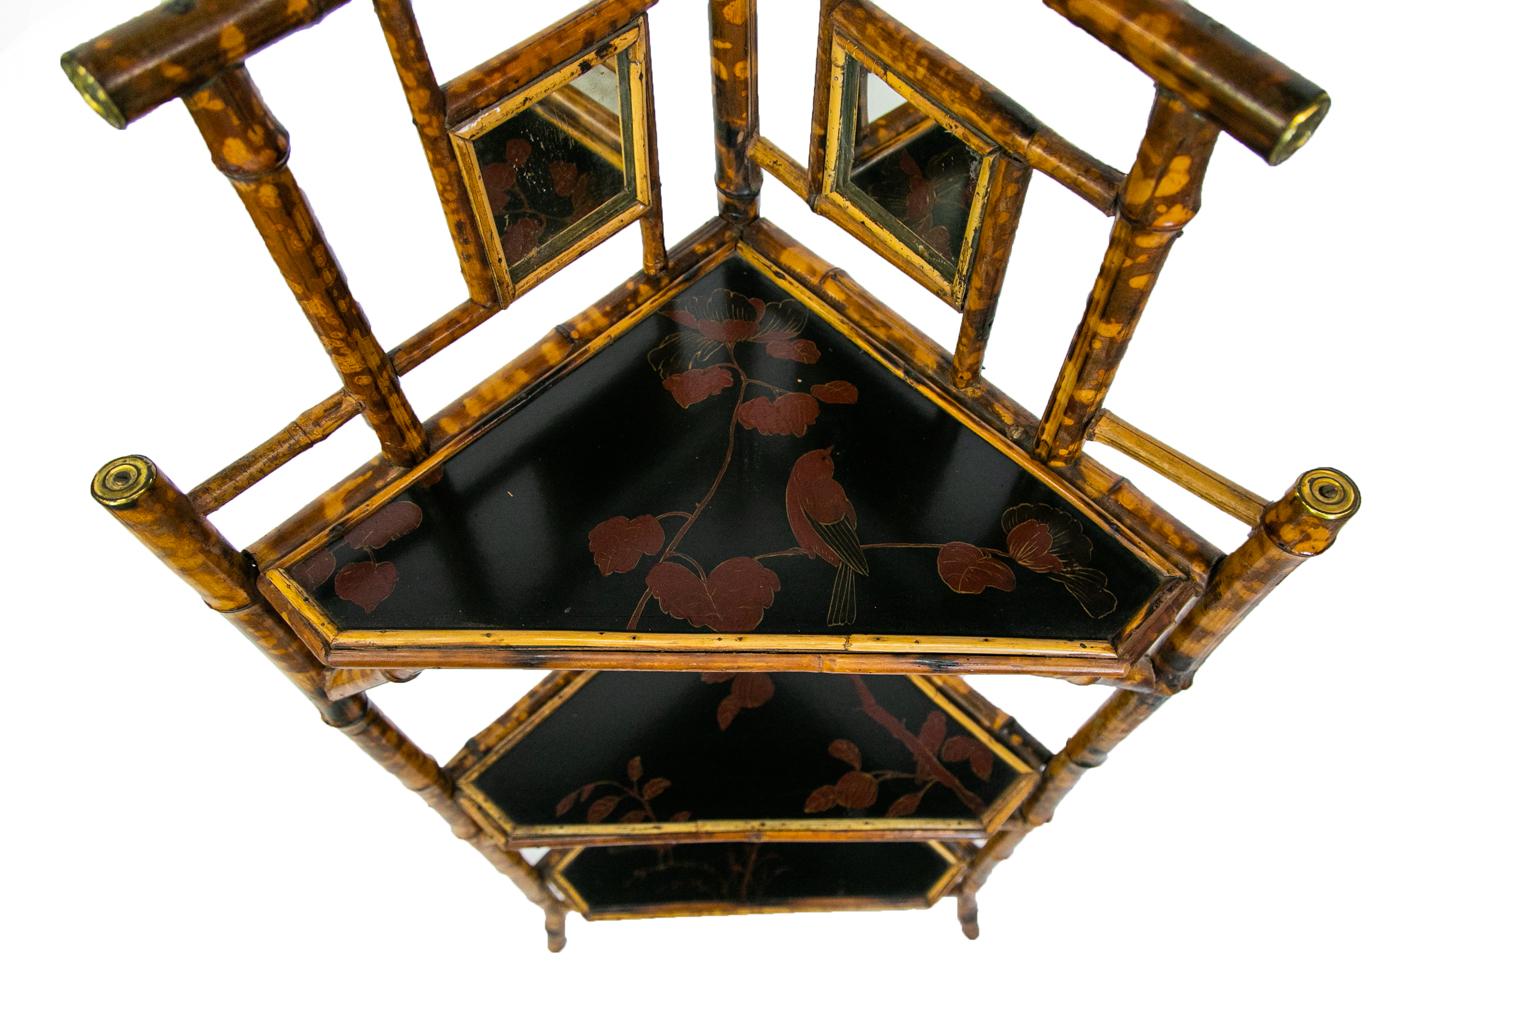 Bamboo corner shelf has two square mirrors in the upper back panels. The bamboo ends are capped with brass rosettes. All three shelves have Asian lacquer painting framed by split bamboo.
 